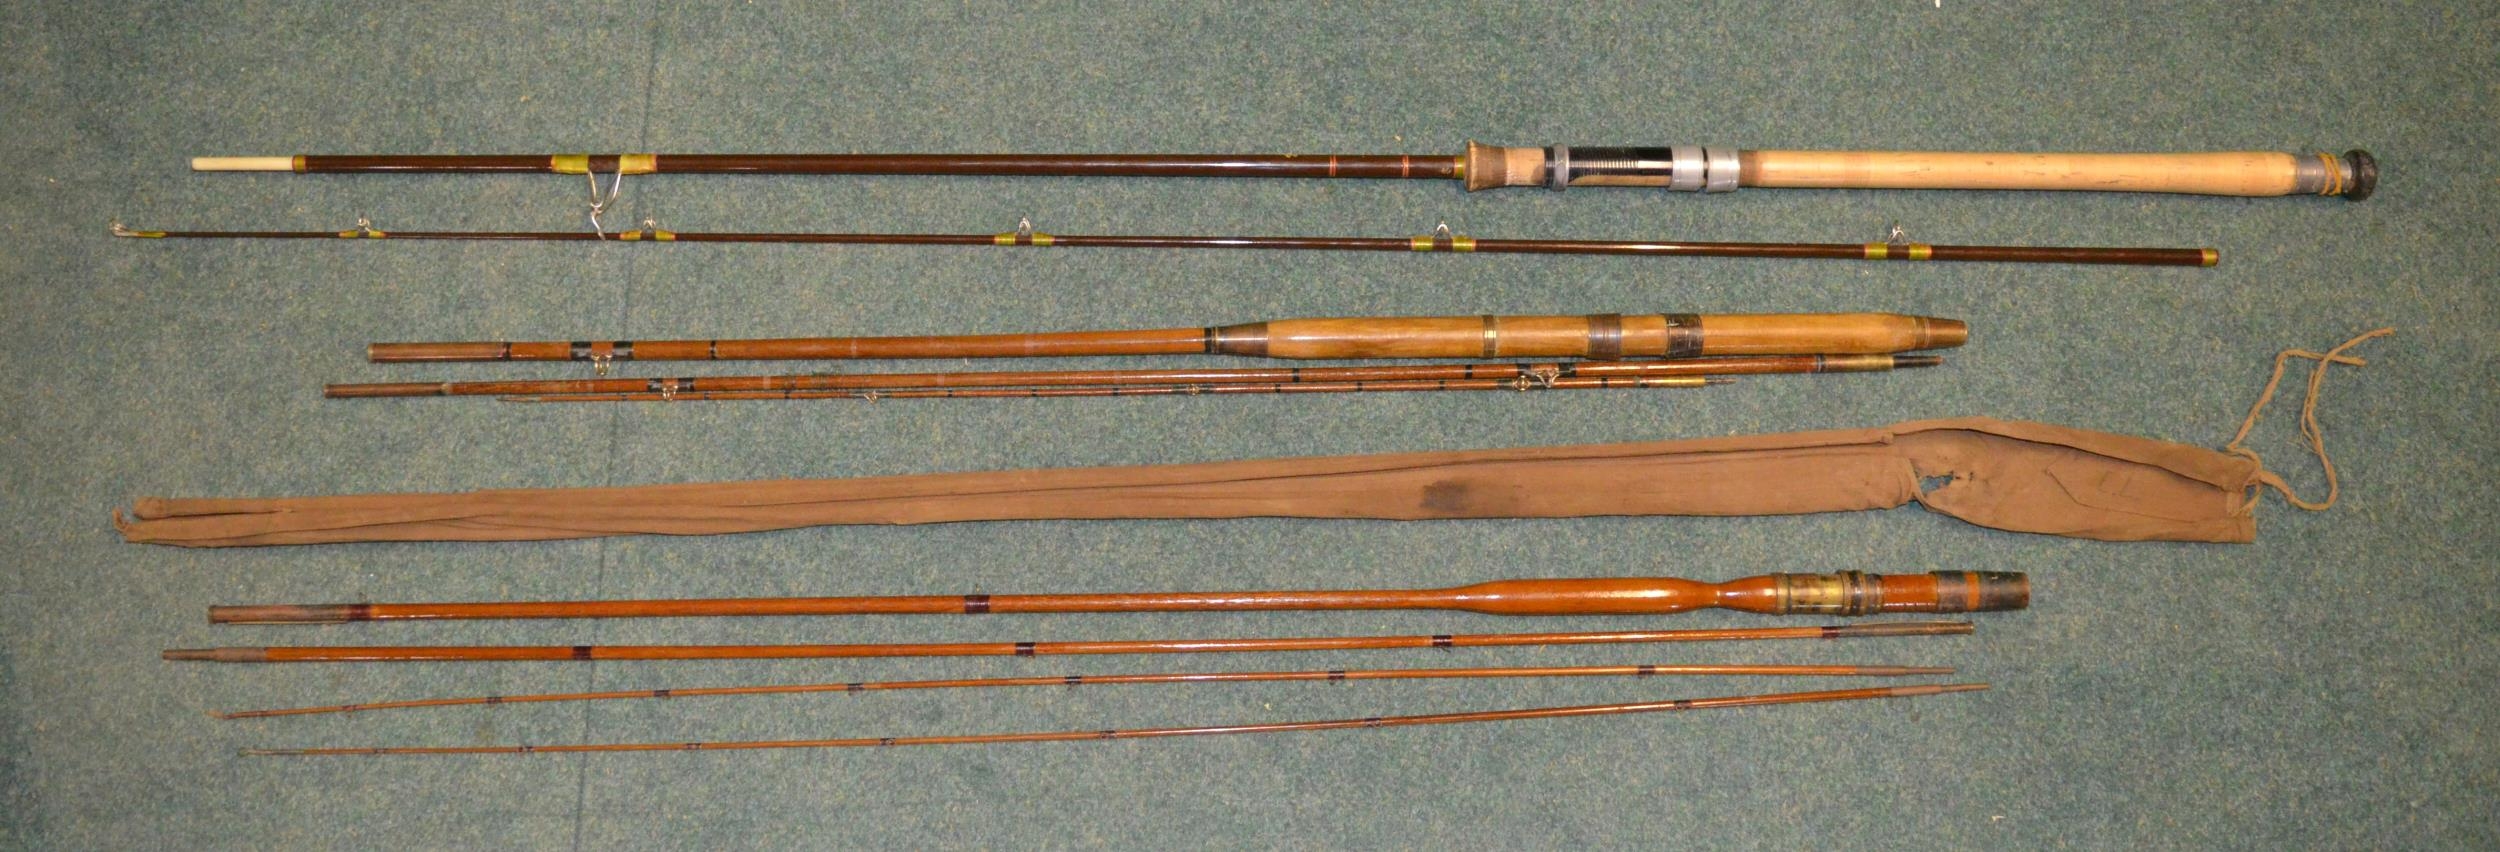 Three vintage rods, two split canes and an early Hardy carbon fibre light two handled general